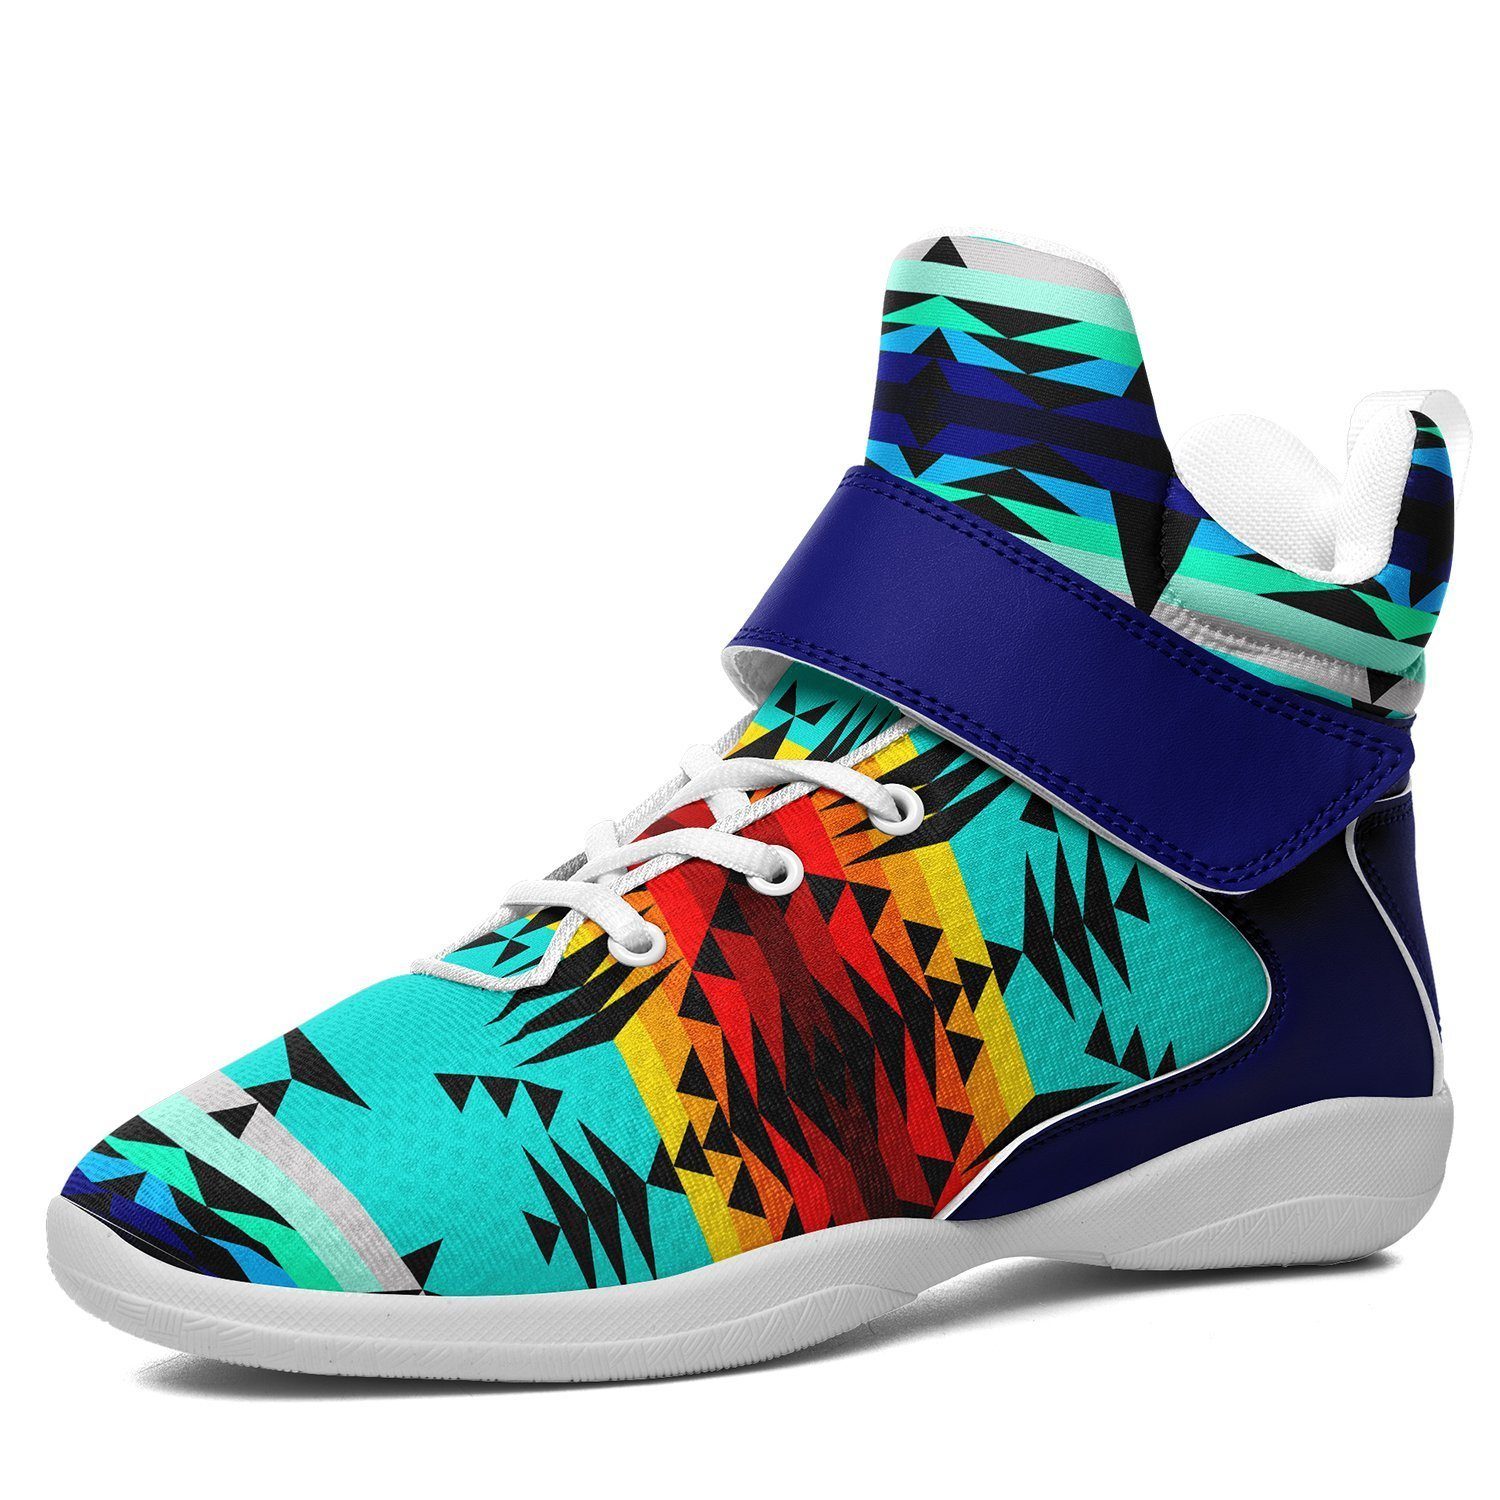 Between the Mountains Ipottaa Basketball / Sport High Top Shoes - White Sole 49 Dzine US Men 7 / EUR 40 White Sole with Blue Strap 